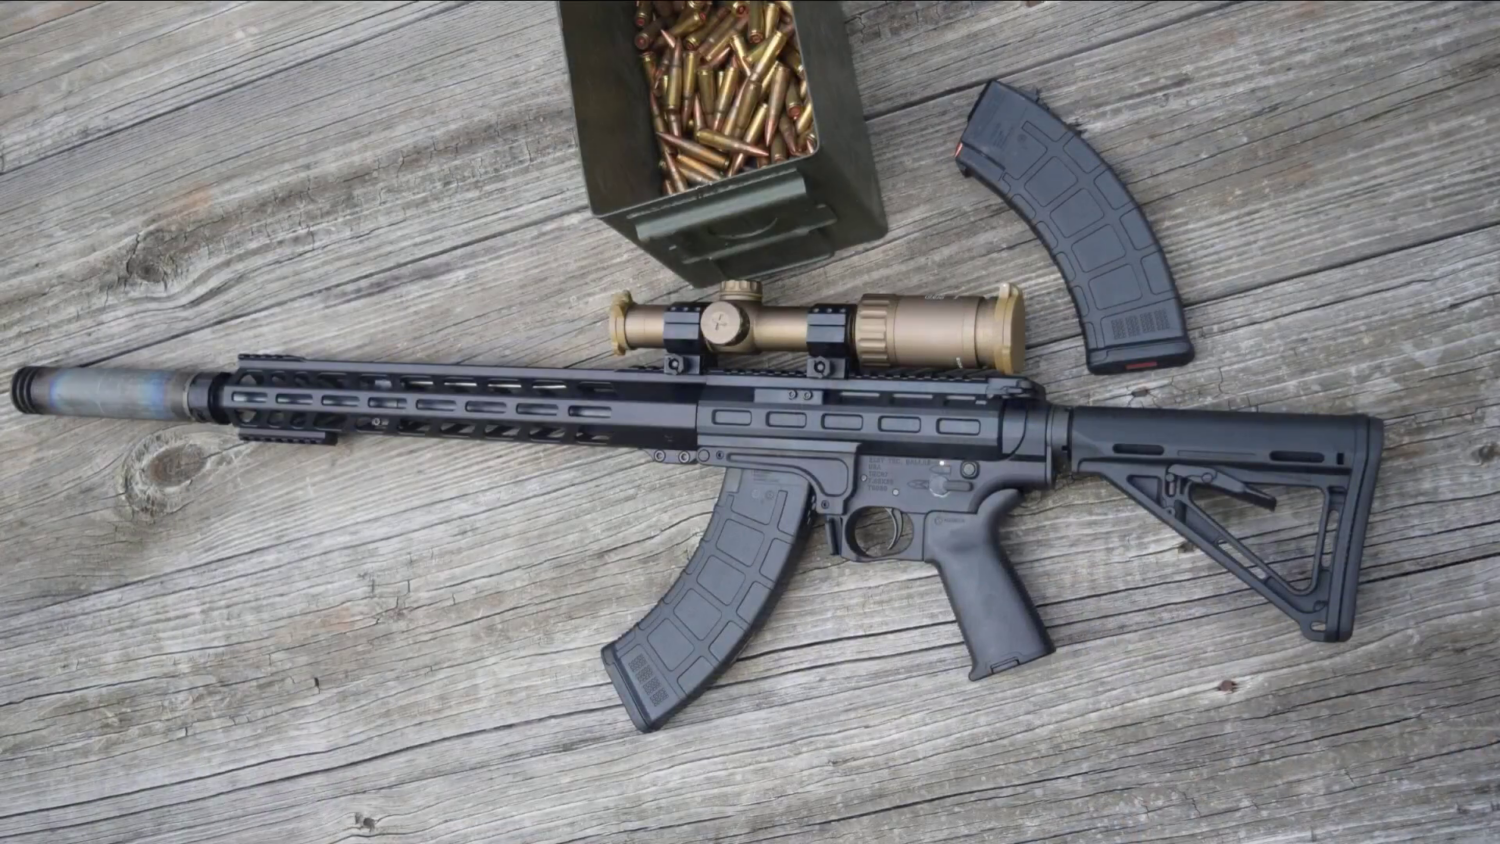 The TEC47 Rifle By 21st Tec - AR10 Meets AK Mags